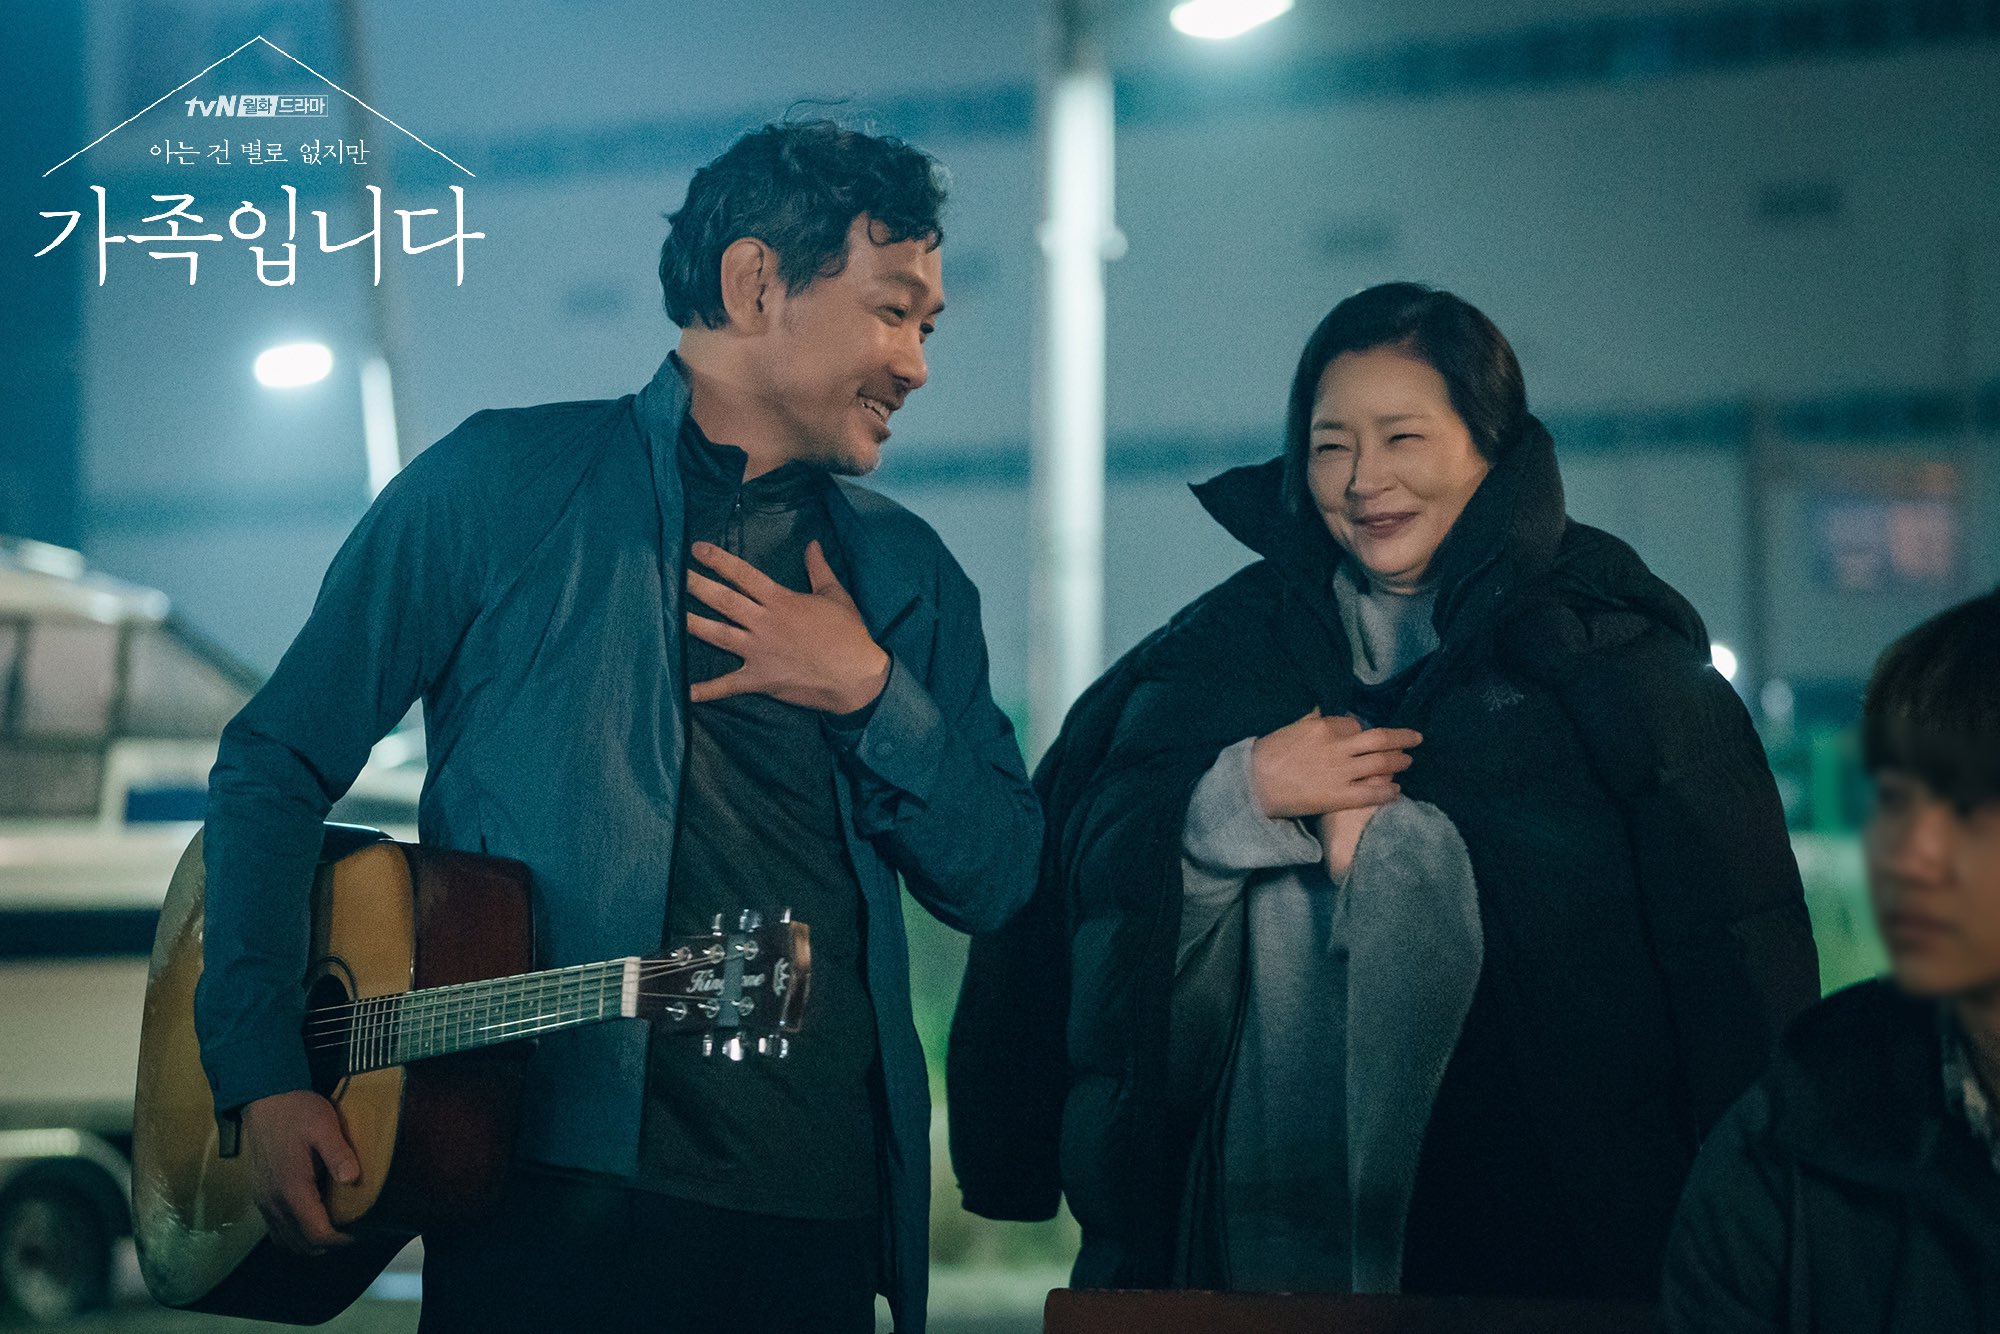 [2020 Year in Review] Life-affirming drama themes